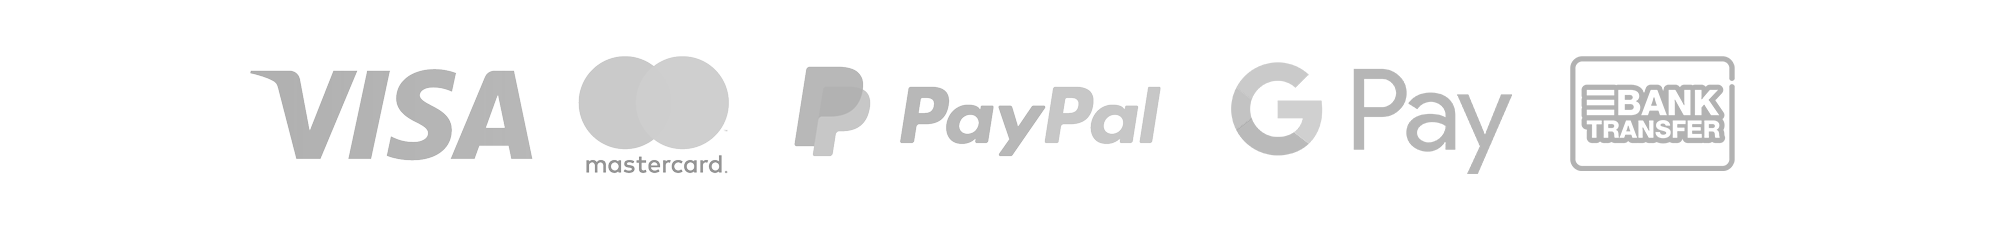 payments-bw-05